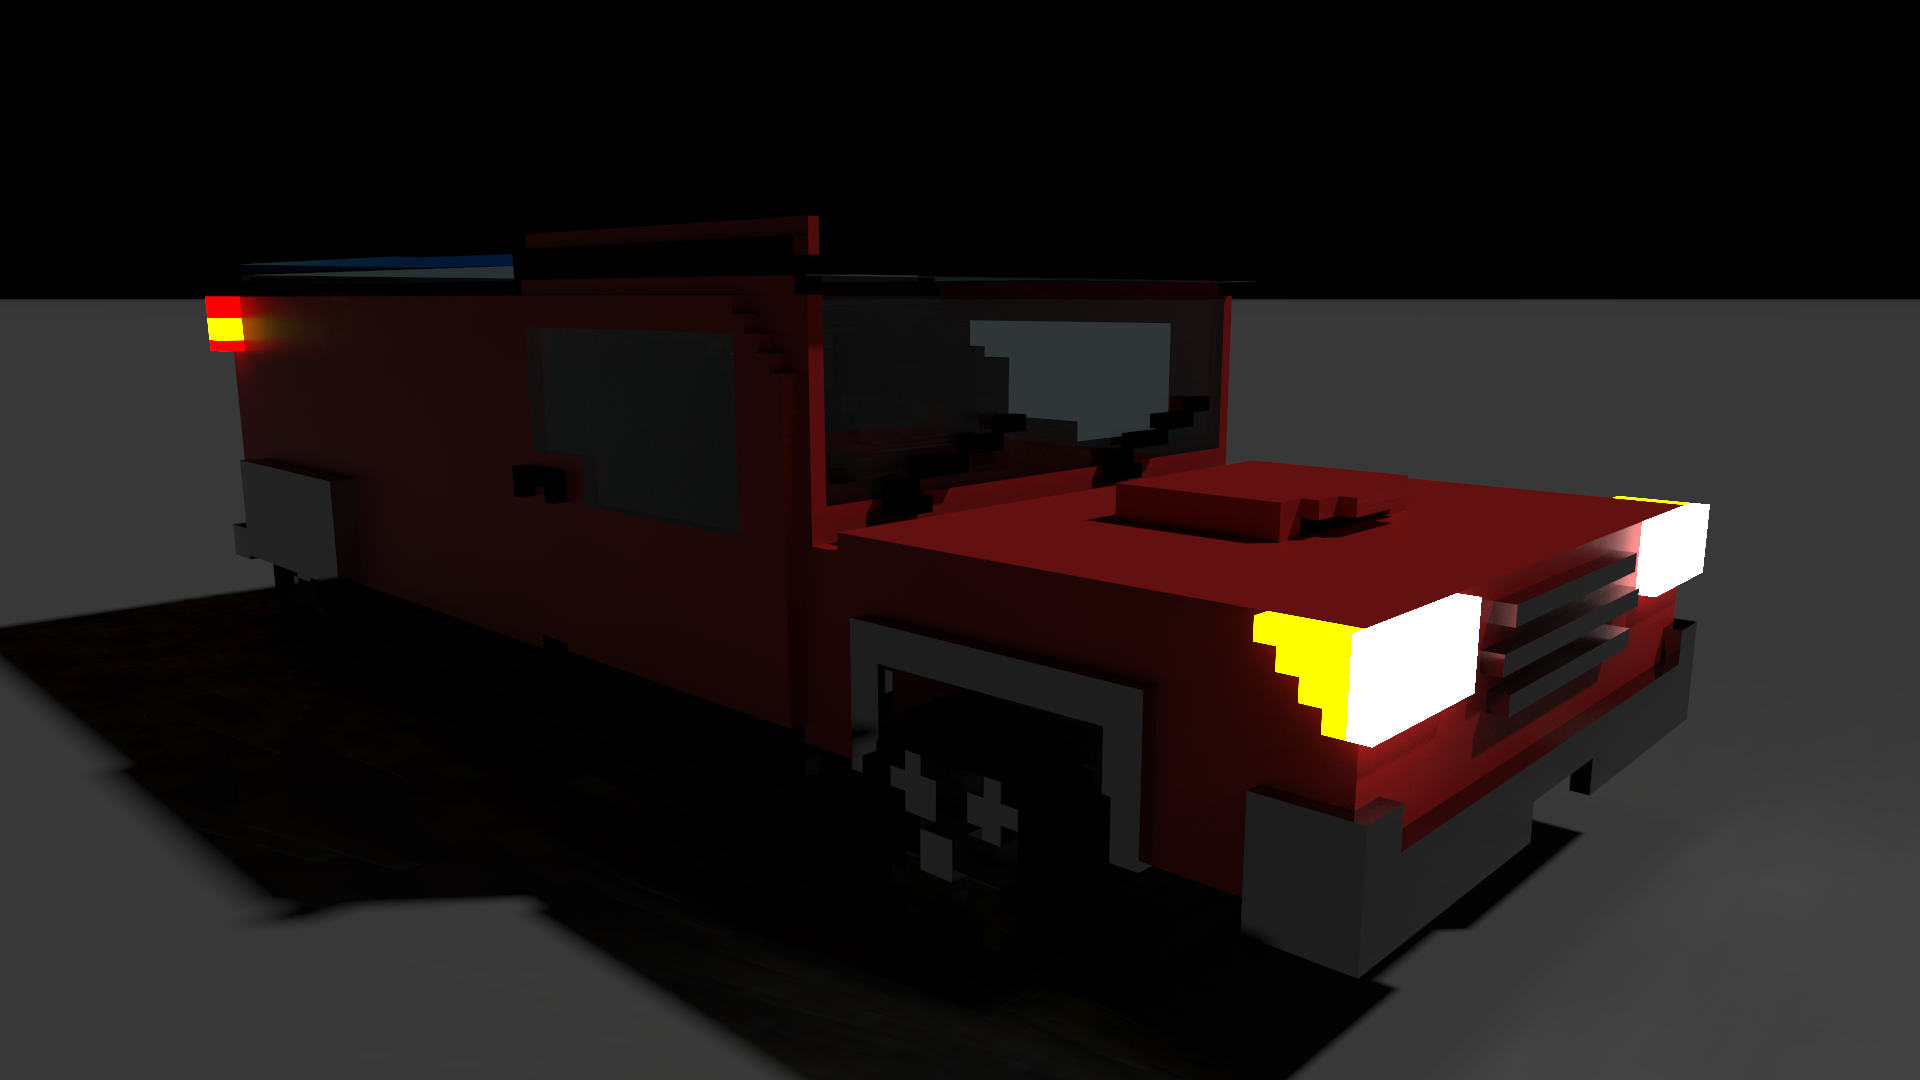 It's a voxel truck at night time. by Mastaan